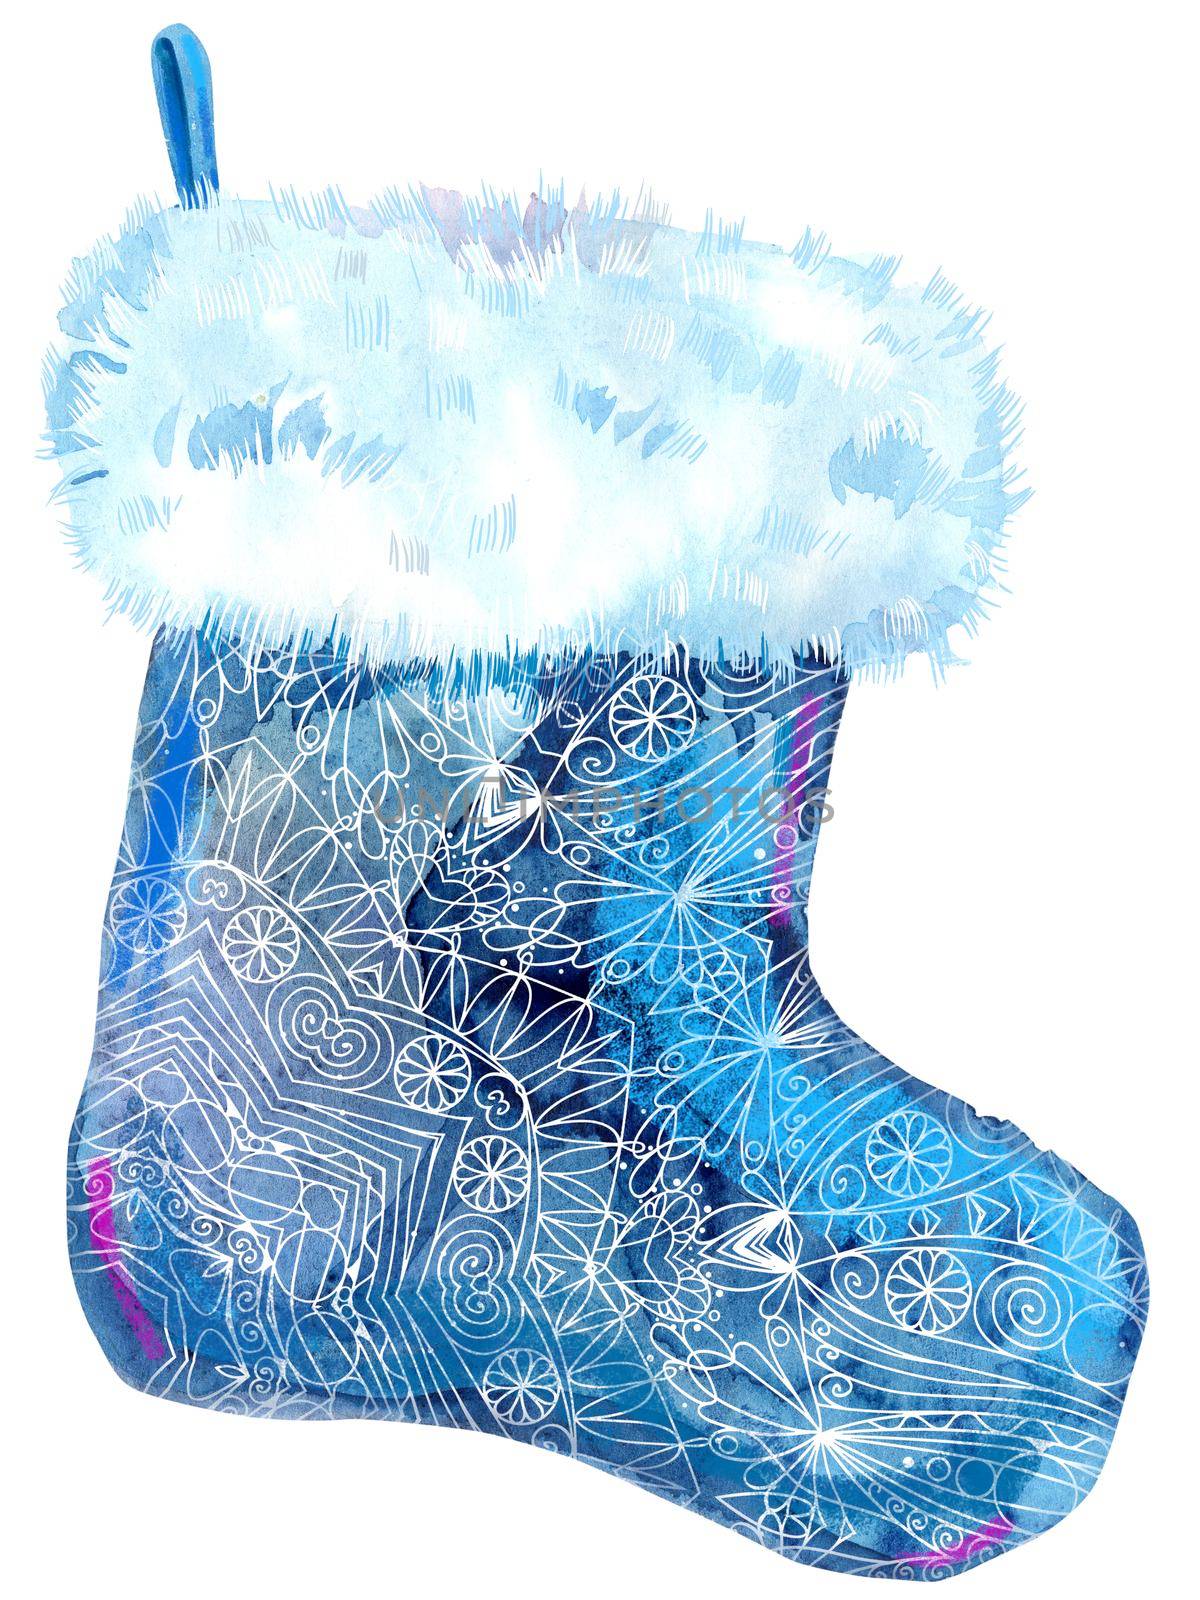 Christmas patterned blue sock with white fur. Watercolor illustration. Isolated. by NataOmsk